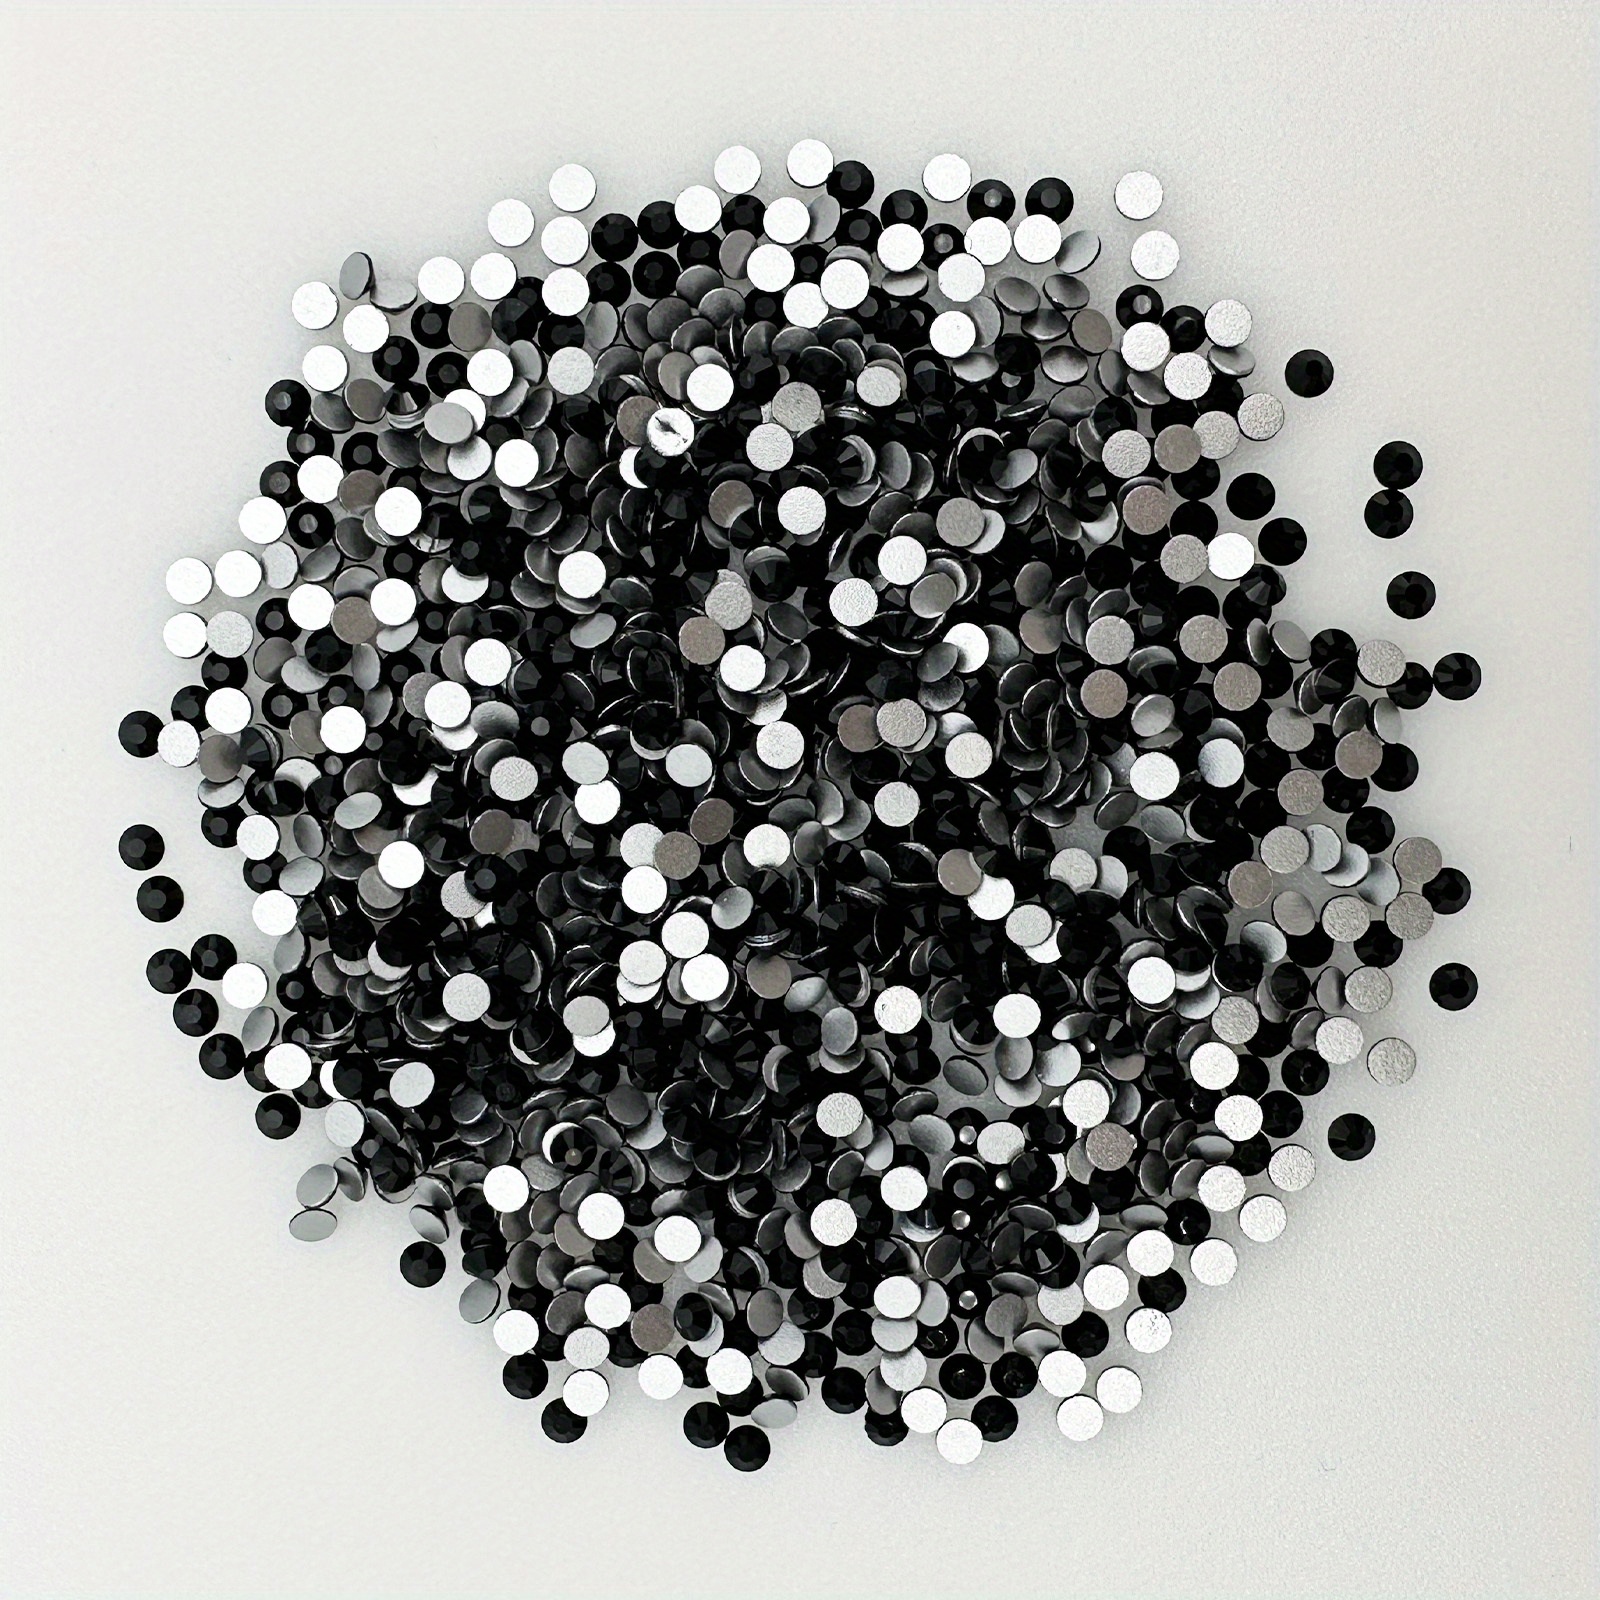 Yantuo Flat Back Rhinestones Black Crystal AB SS20 1440 Pcs, 5mm Round Non Hotfix Glass Stones, Bling Gems for Nail Art,Tumbler Cup,Shoes,DIY Crafts